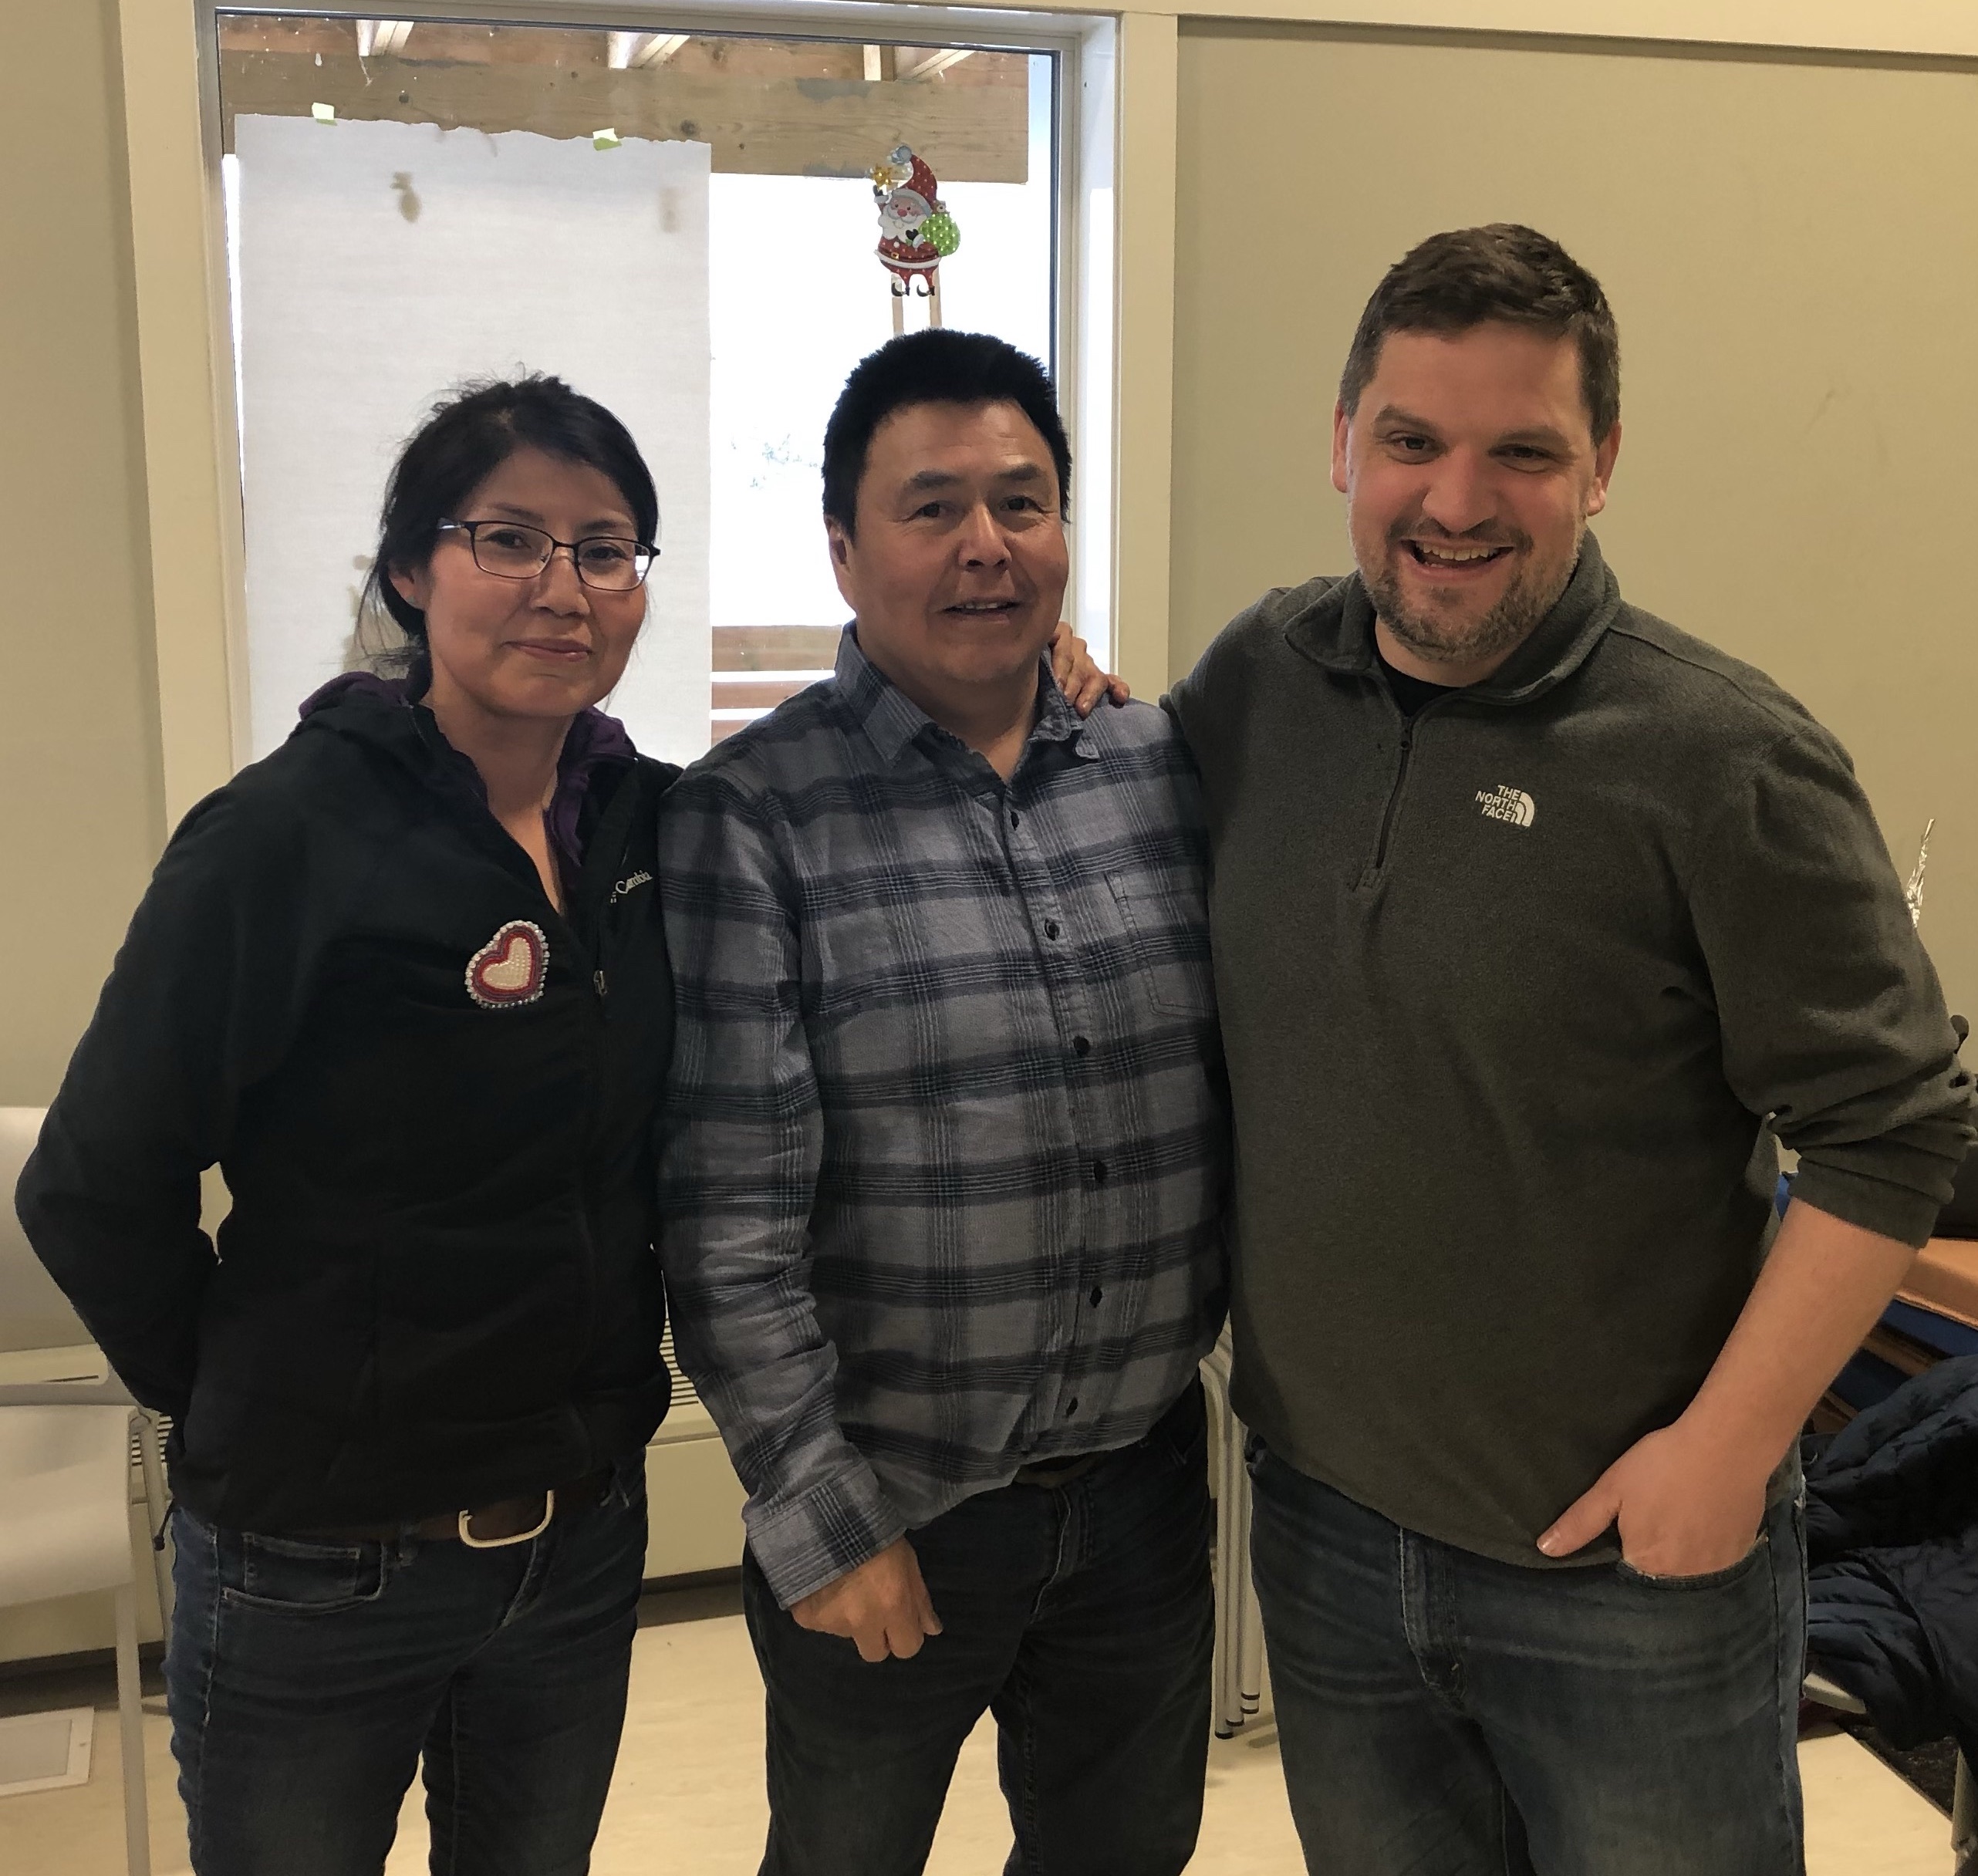 Community research partners Melaine Simba and Chief Lloyd Chicot with researcher Andrew Spring posing for a photo inside of a bright room